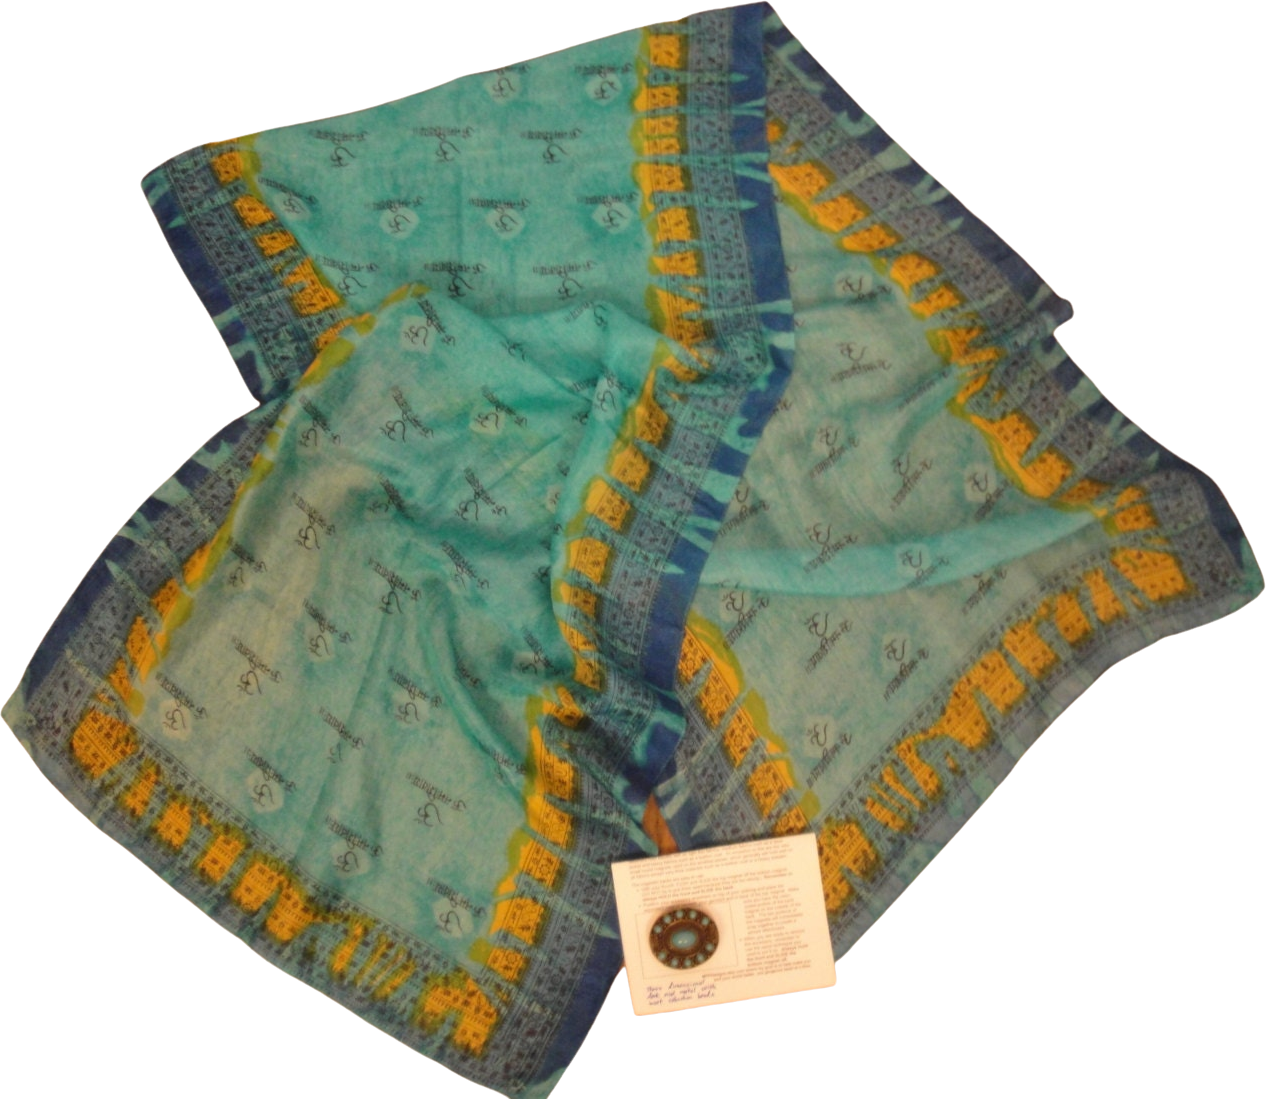 Oblong Scarf & Brooch Set, India Arts Sheer Silk 20 by 66 Inch, Made in  India, Ethnic Print, Teal/gold/blue/black, Bonus Magnetic Brooch 